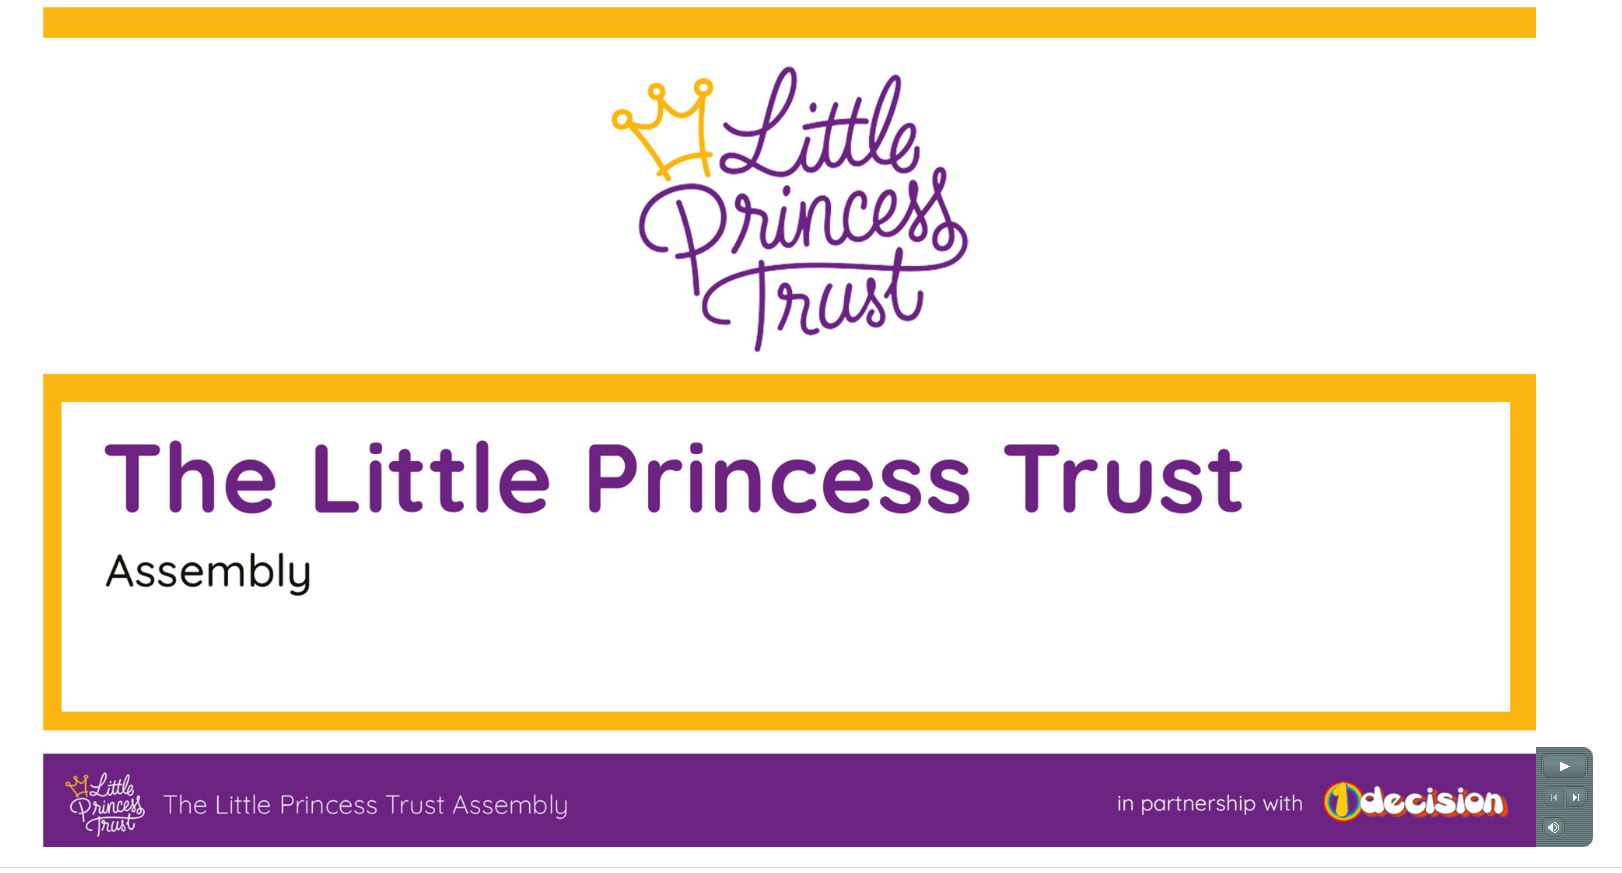 The Little Princess Trust Assembly